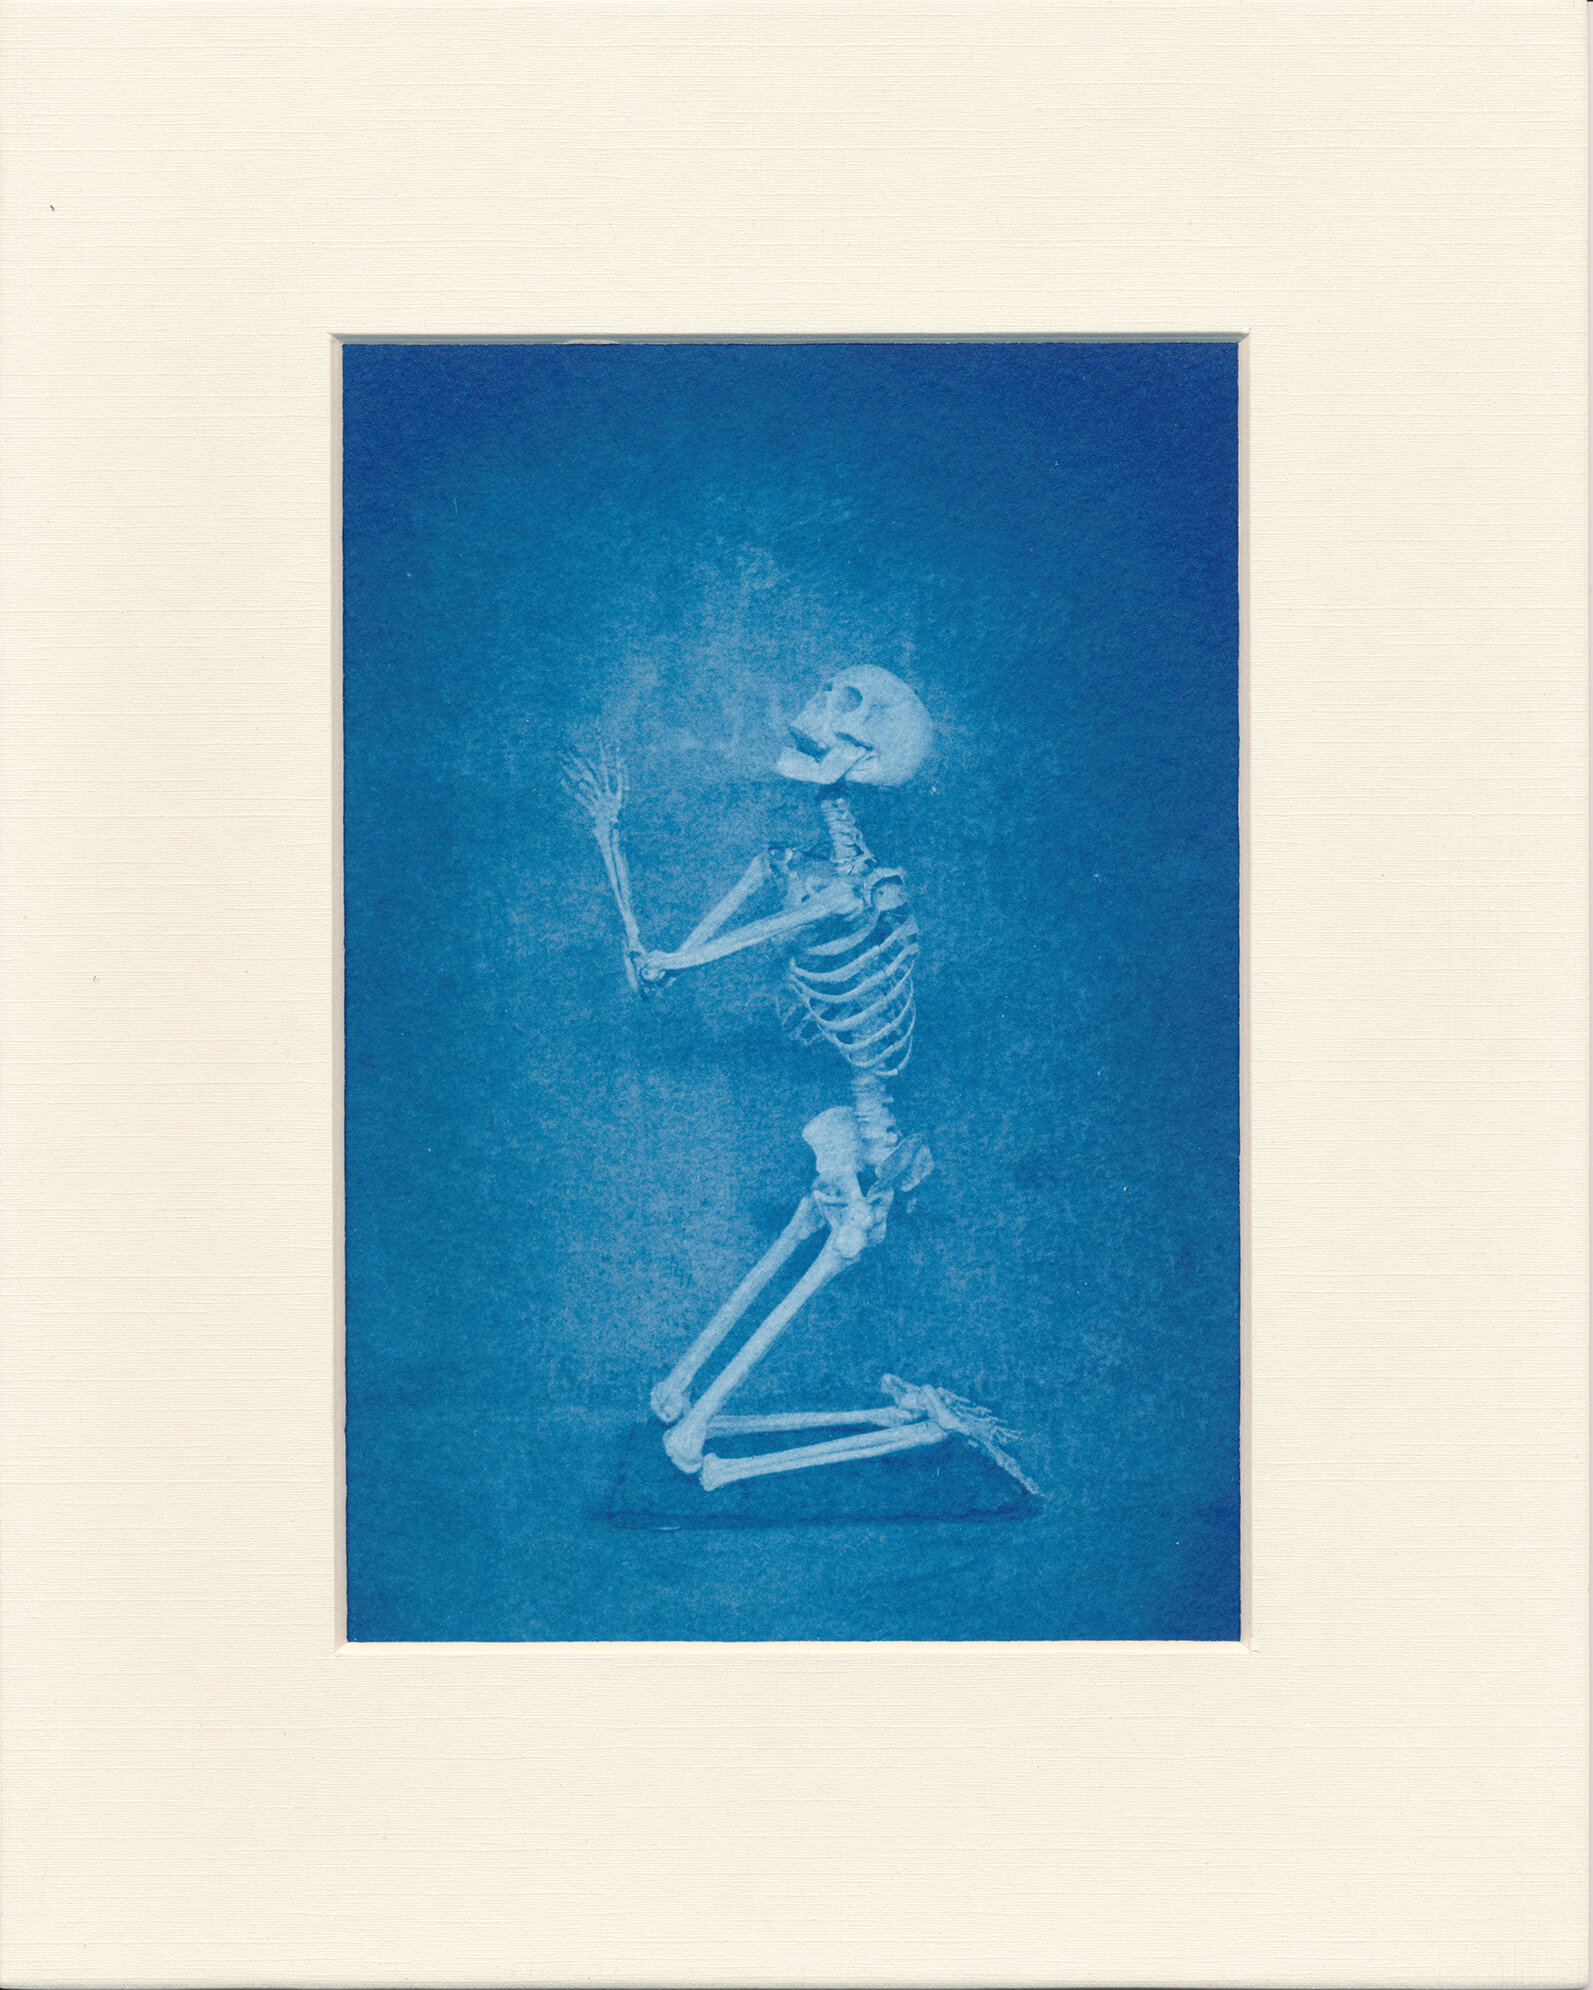  After the Lamentation  2015  Cyanotype  5x7 